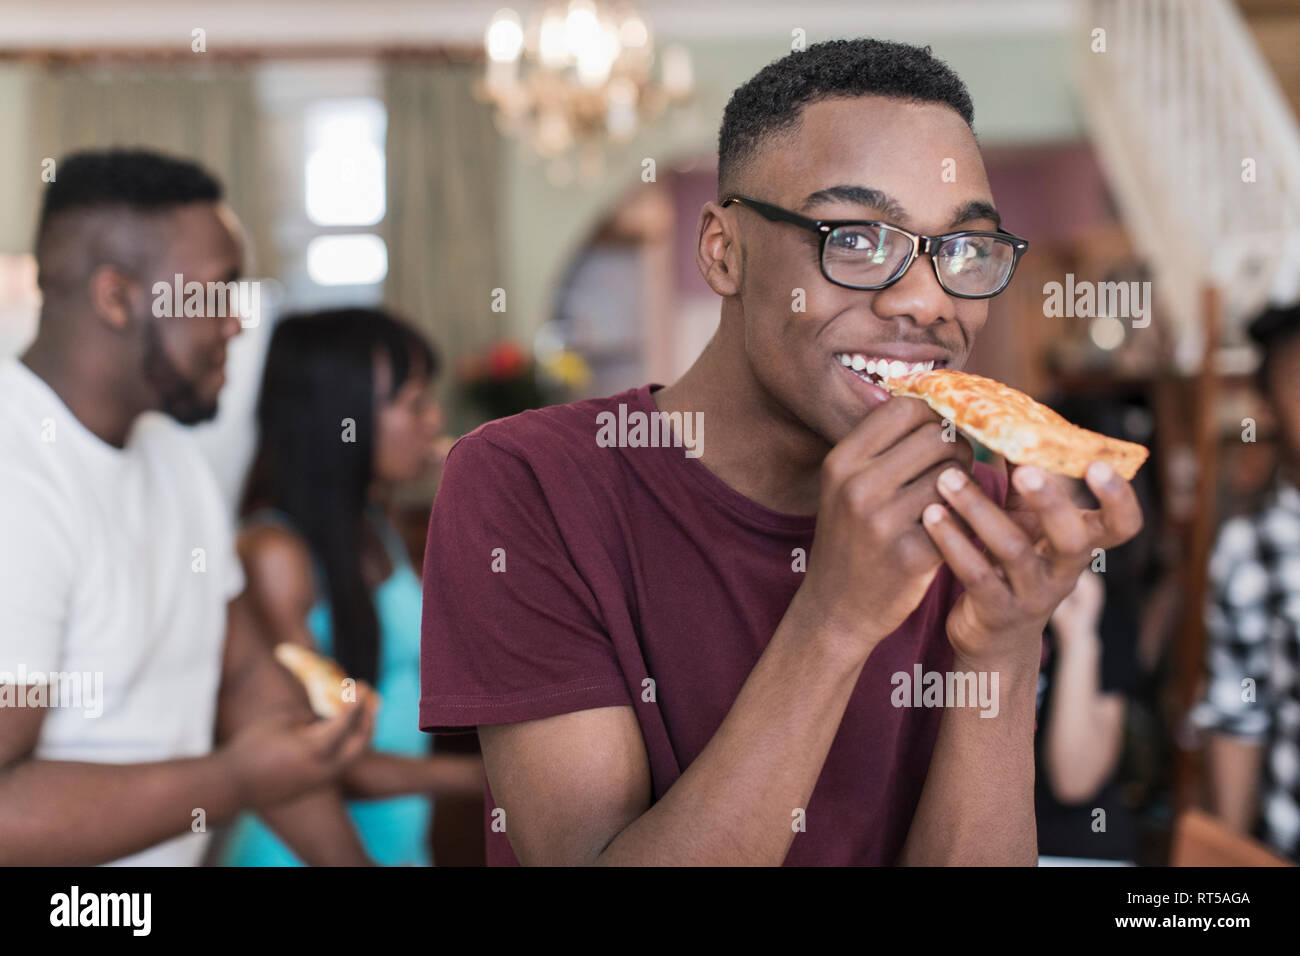 Portrait smiling teenage boy eating pizza with family Stock Photo